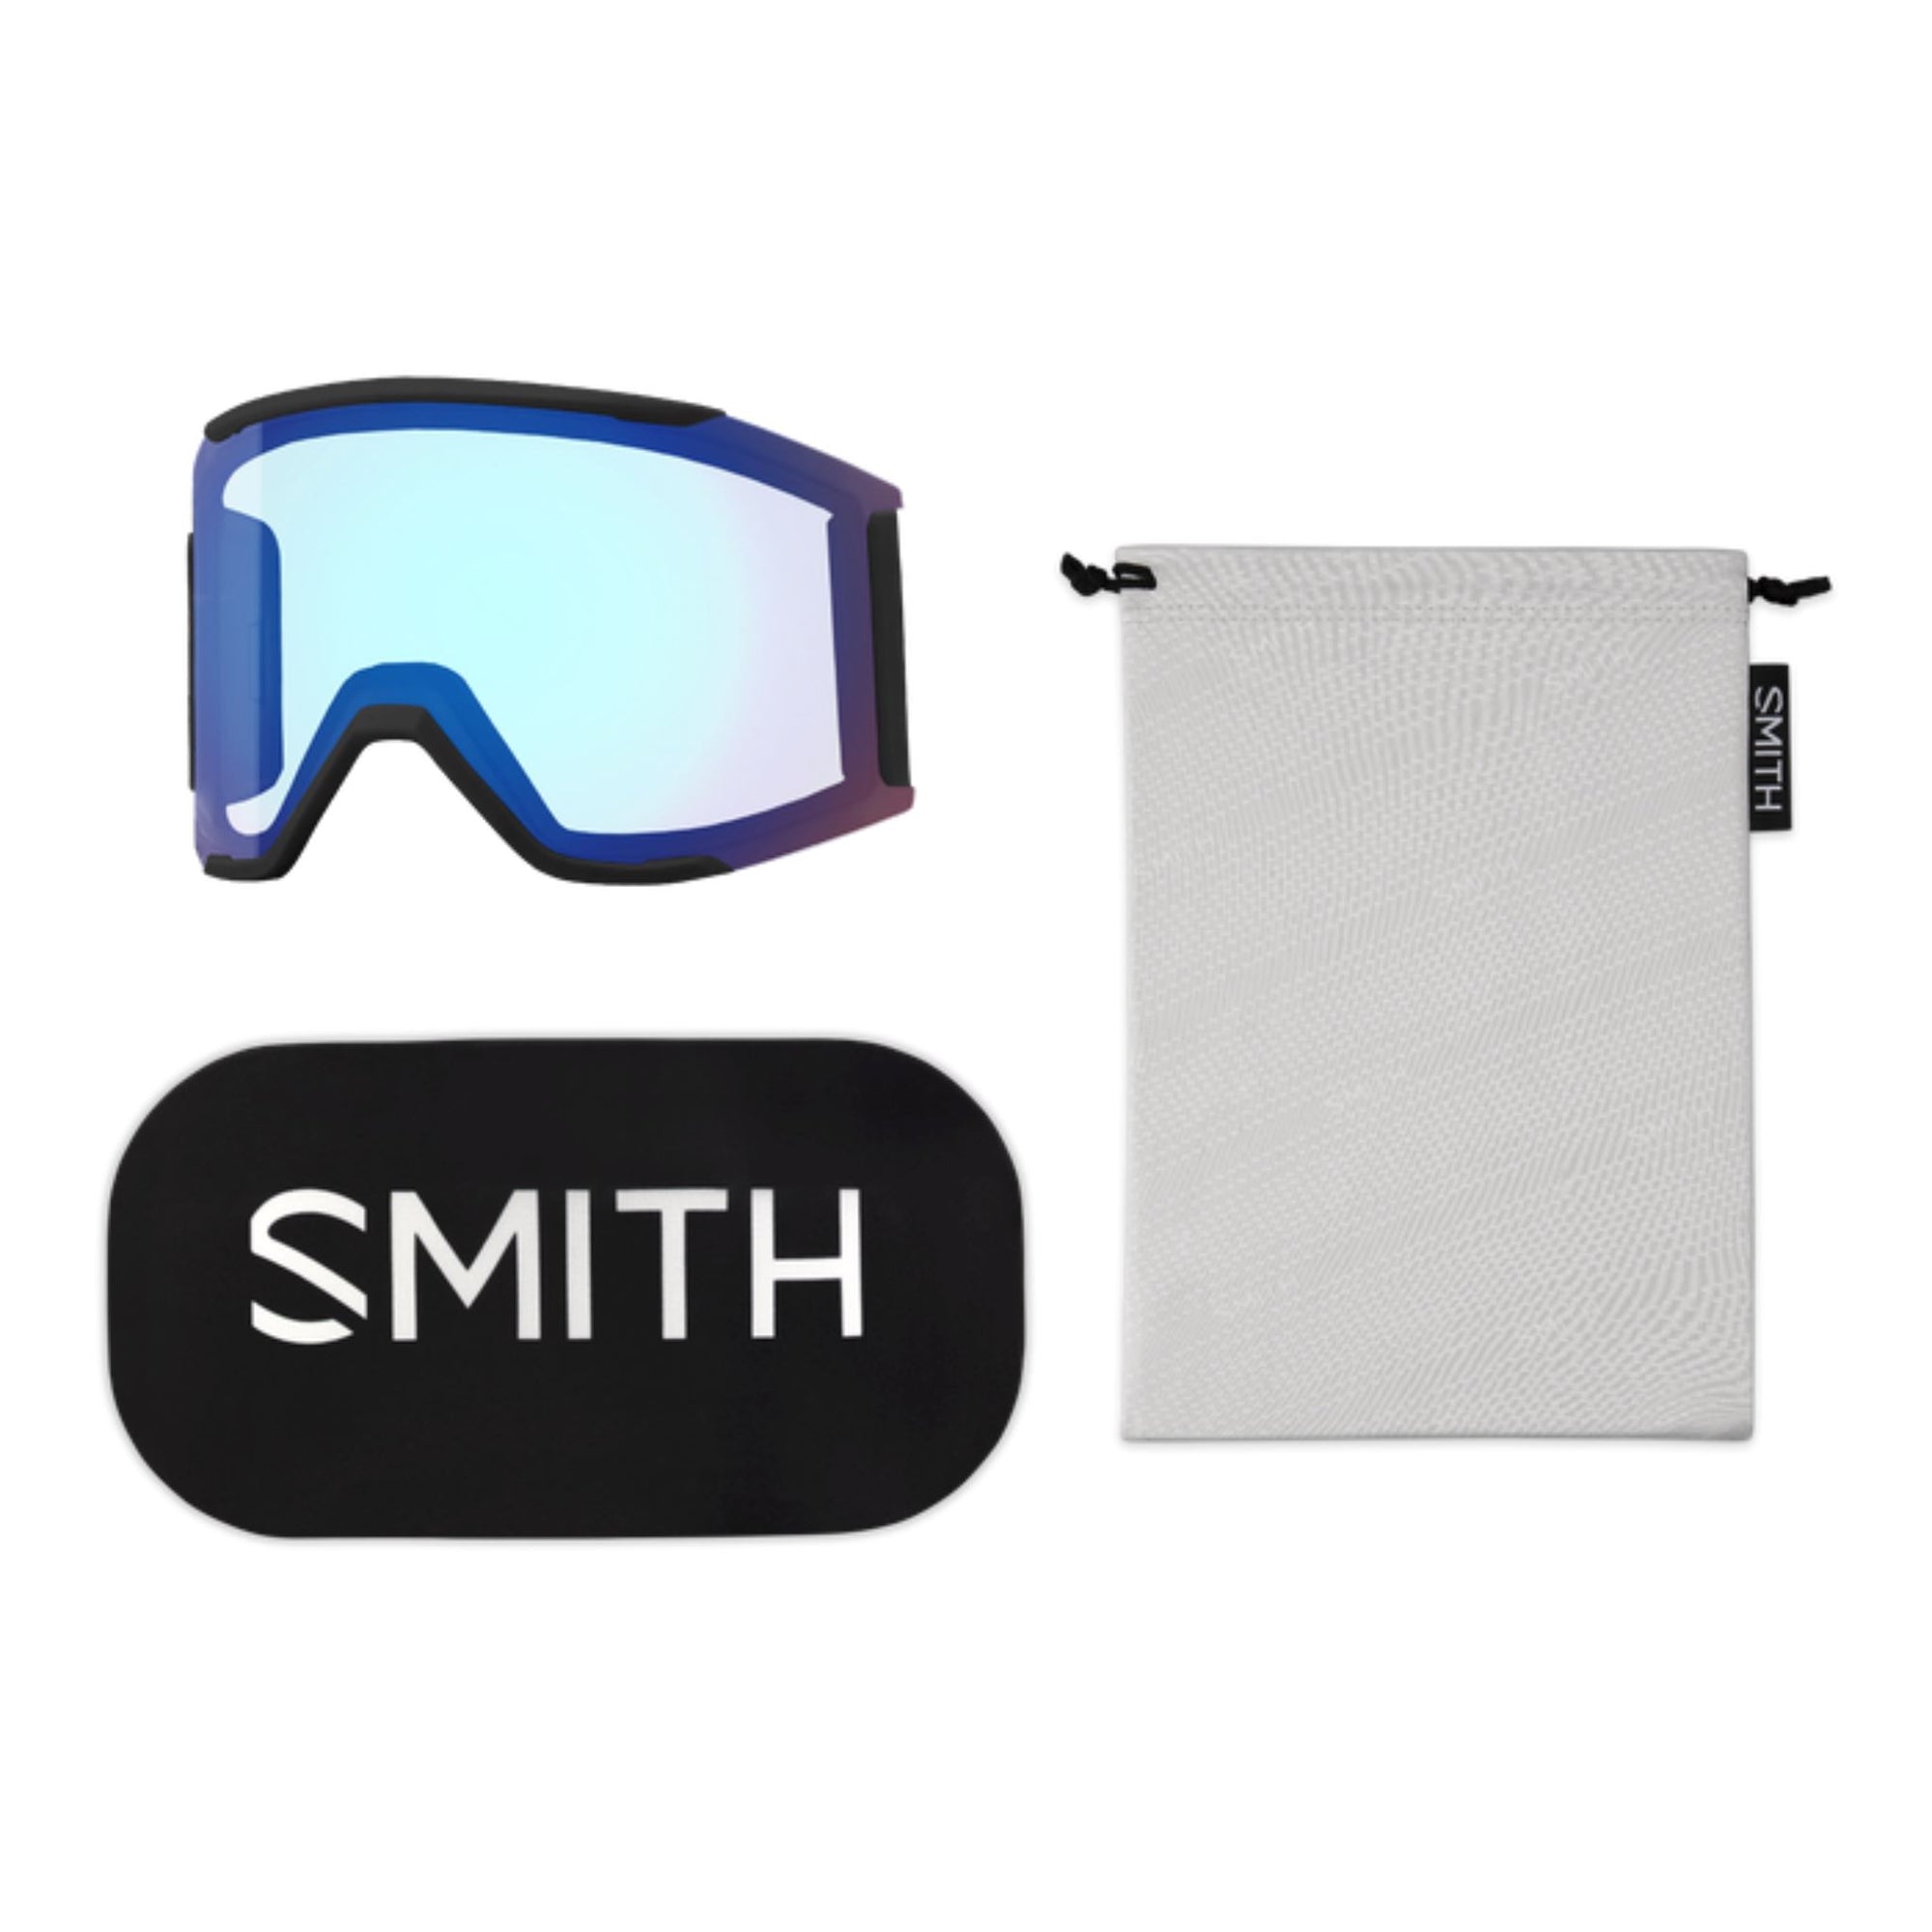 Smith Squad MAG Goggles (Medium Asian Fit) - Chalk Rose ChromaPop Everyday Rose Gold Mirror Goggles Smith 